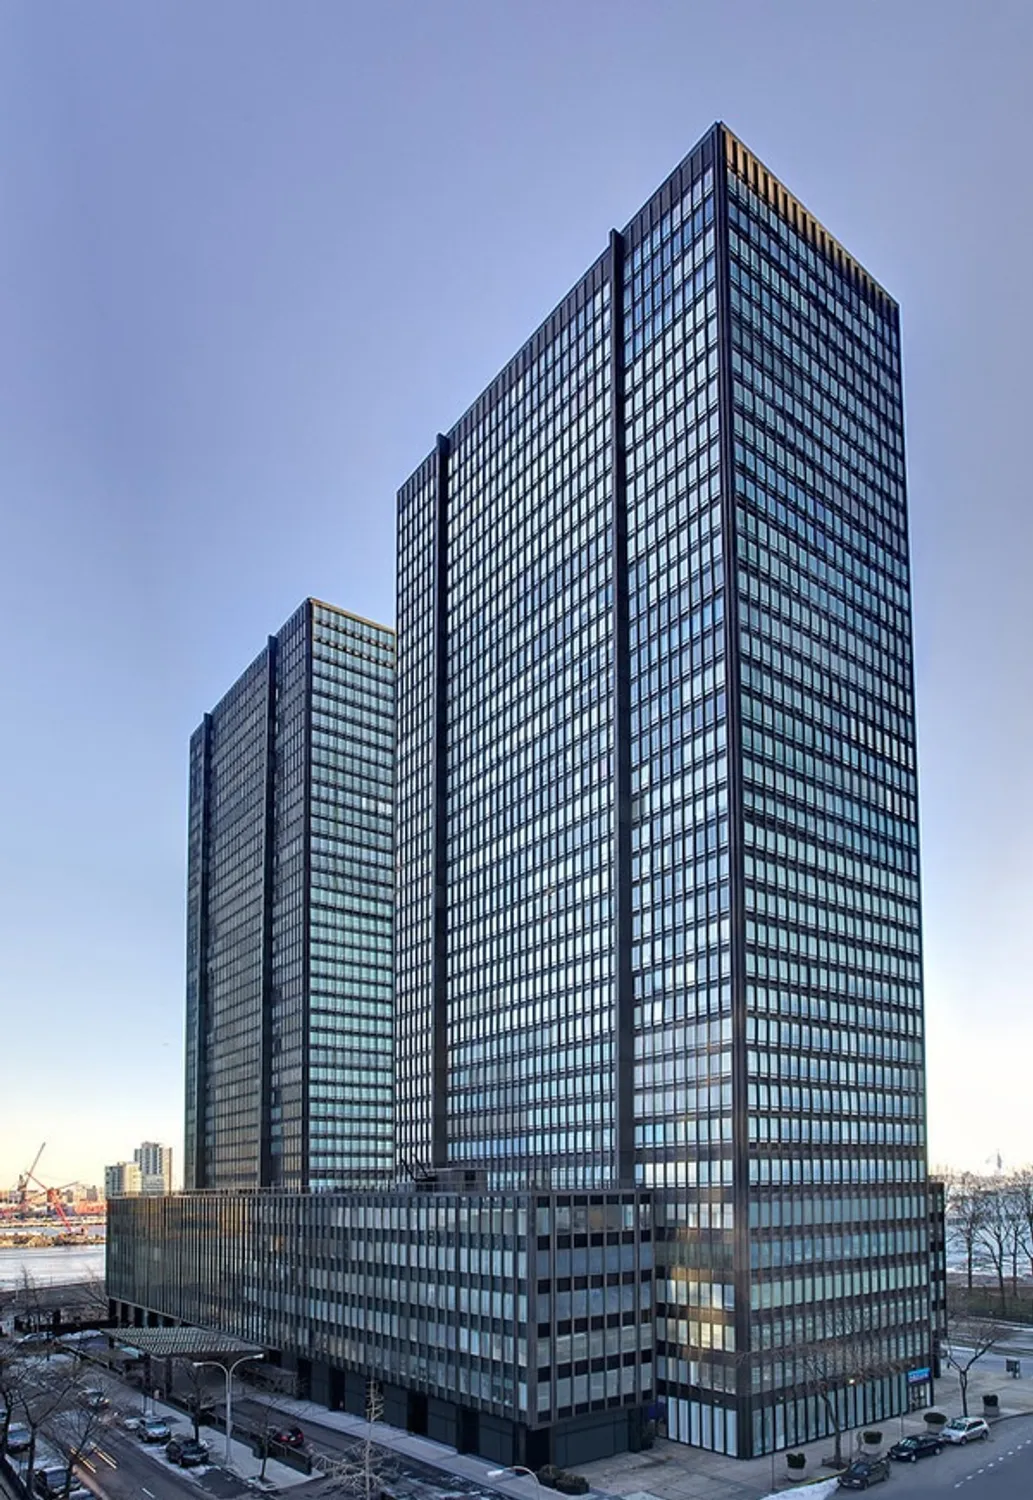 iconic glass building by Harrison & Abramowitz